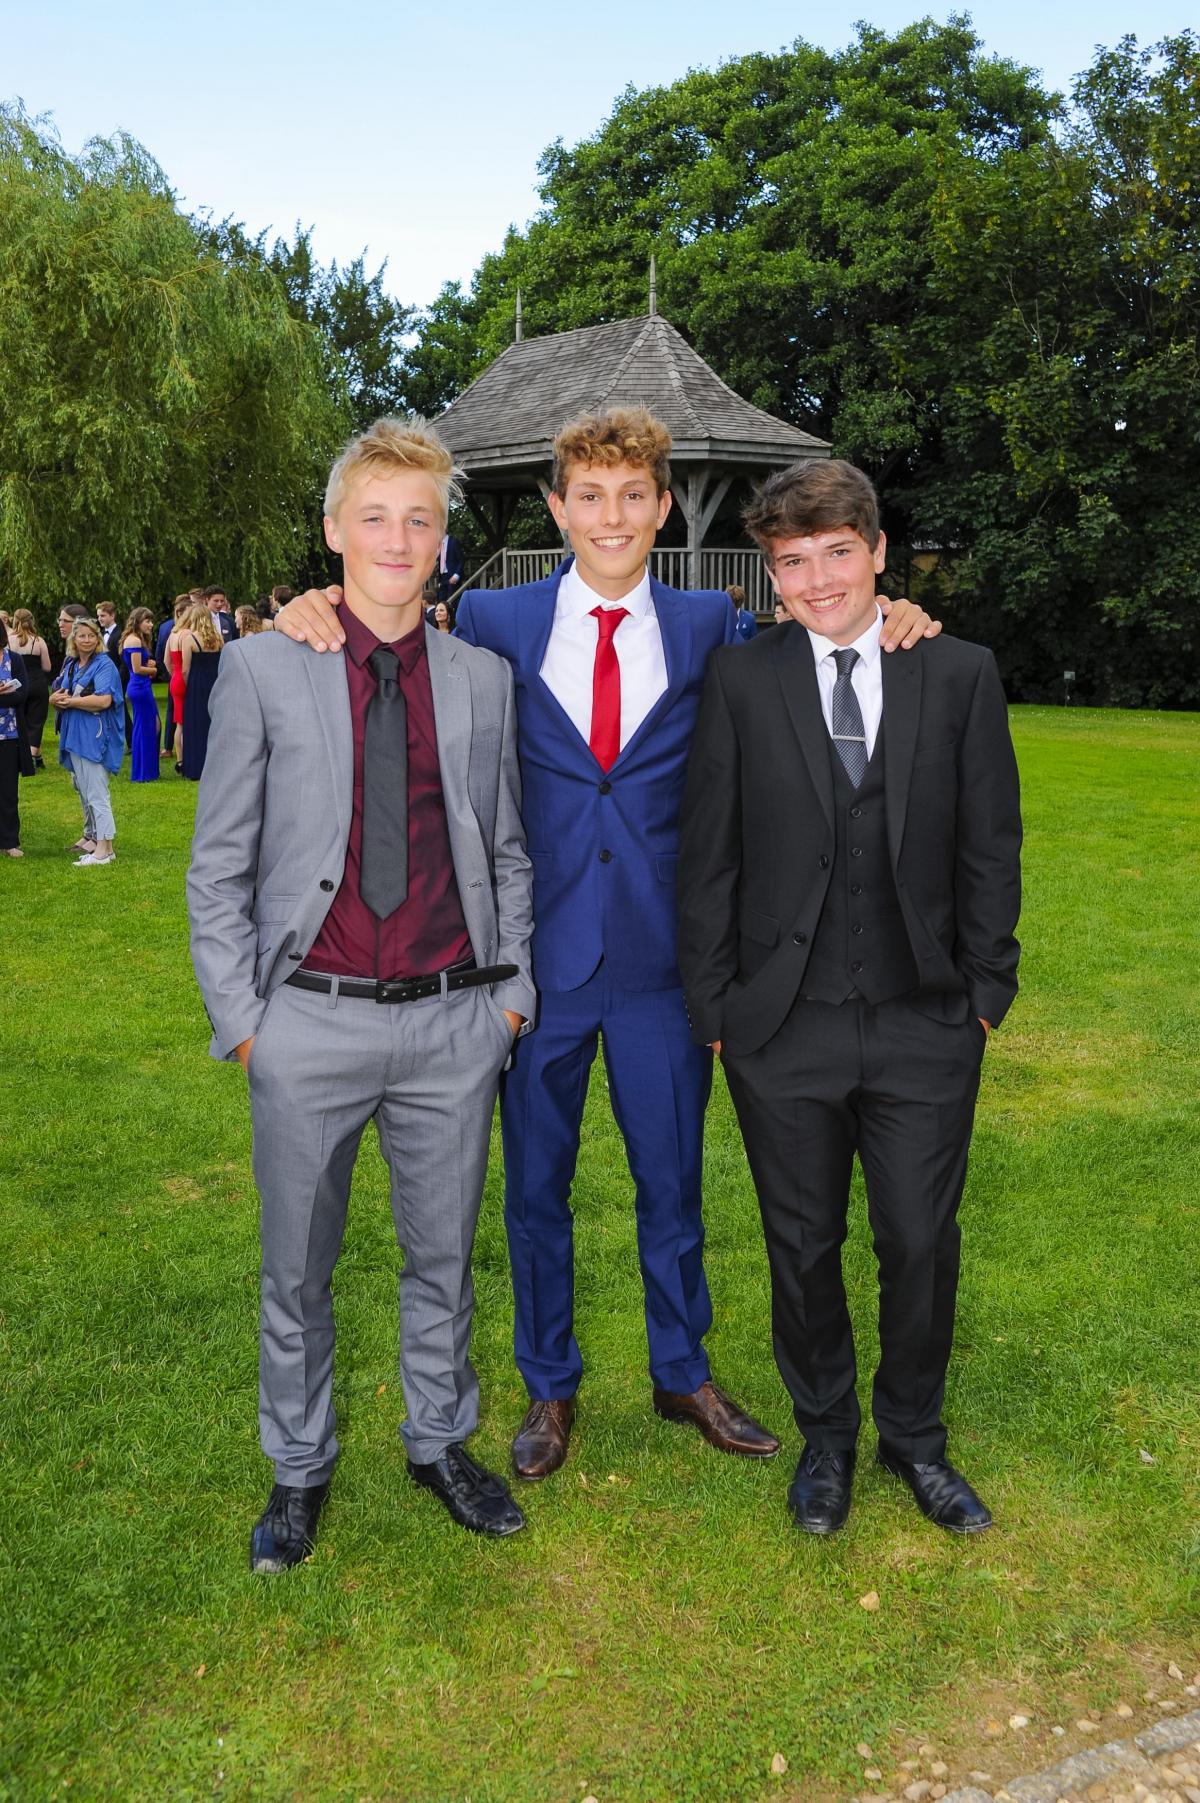 Josh Rawlins, Liam Turley and Jack Howarth, Pictures: GRAHAM HUNT PHOTOGRAPHY